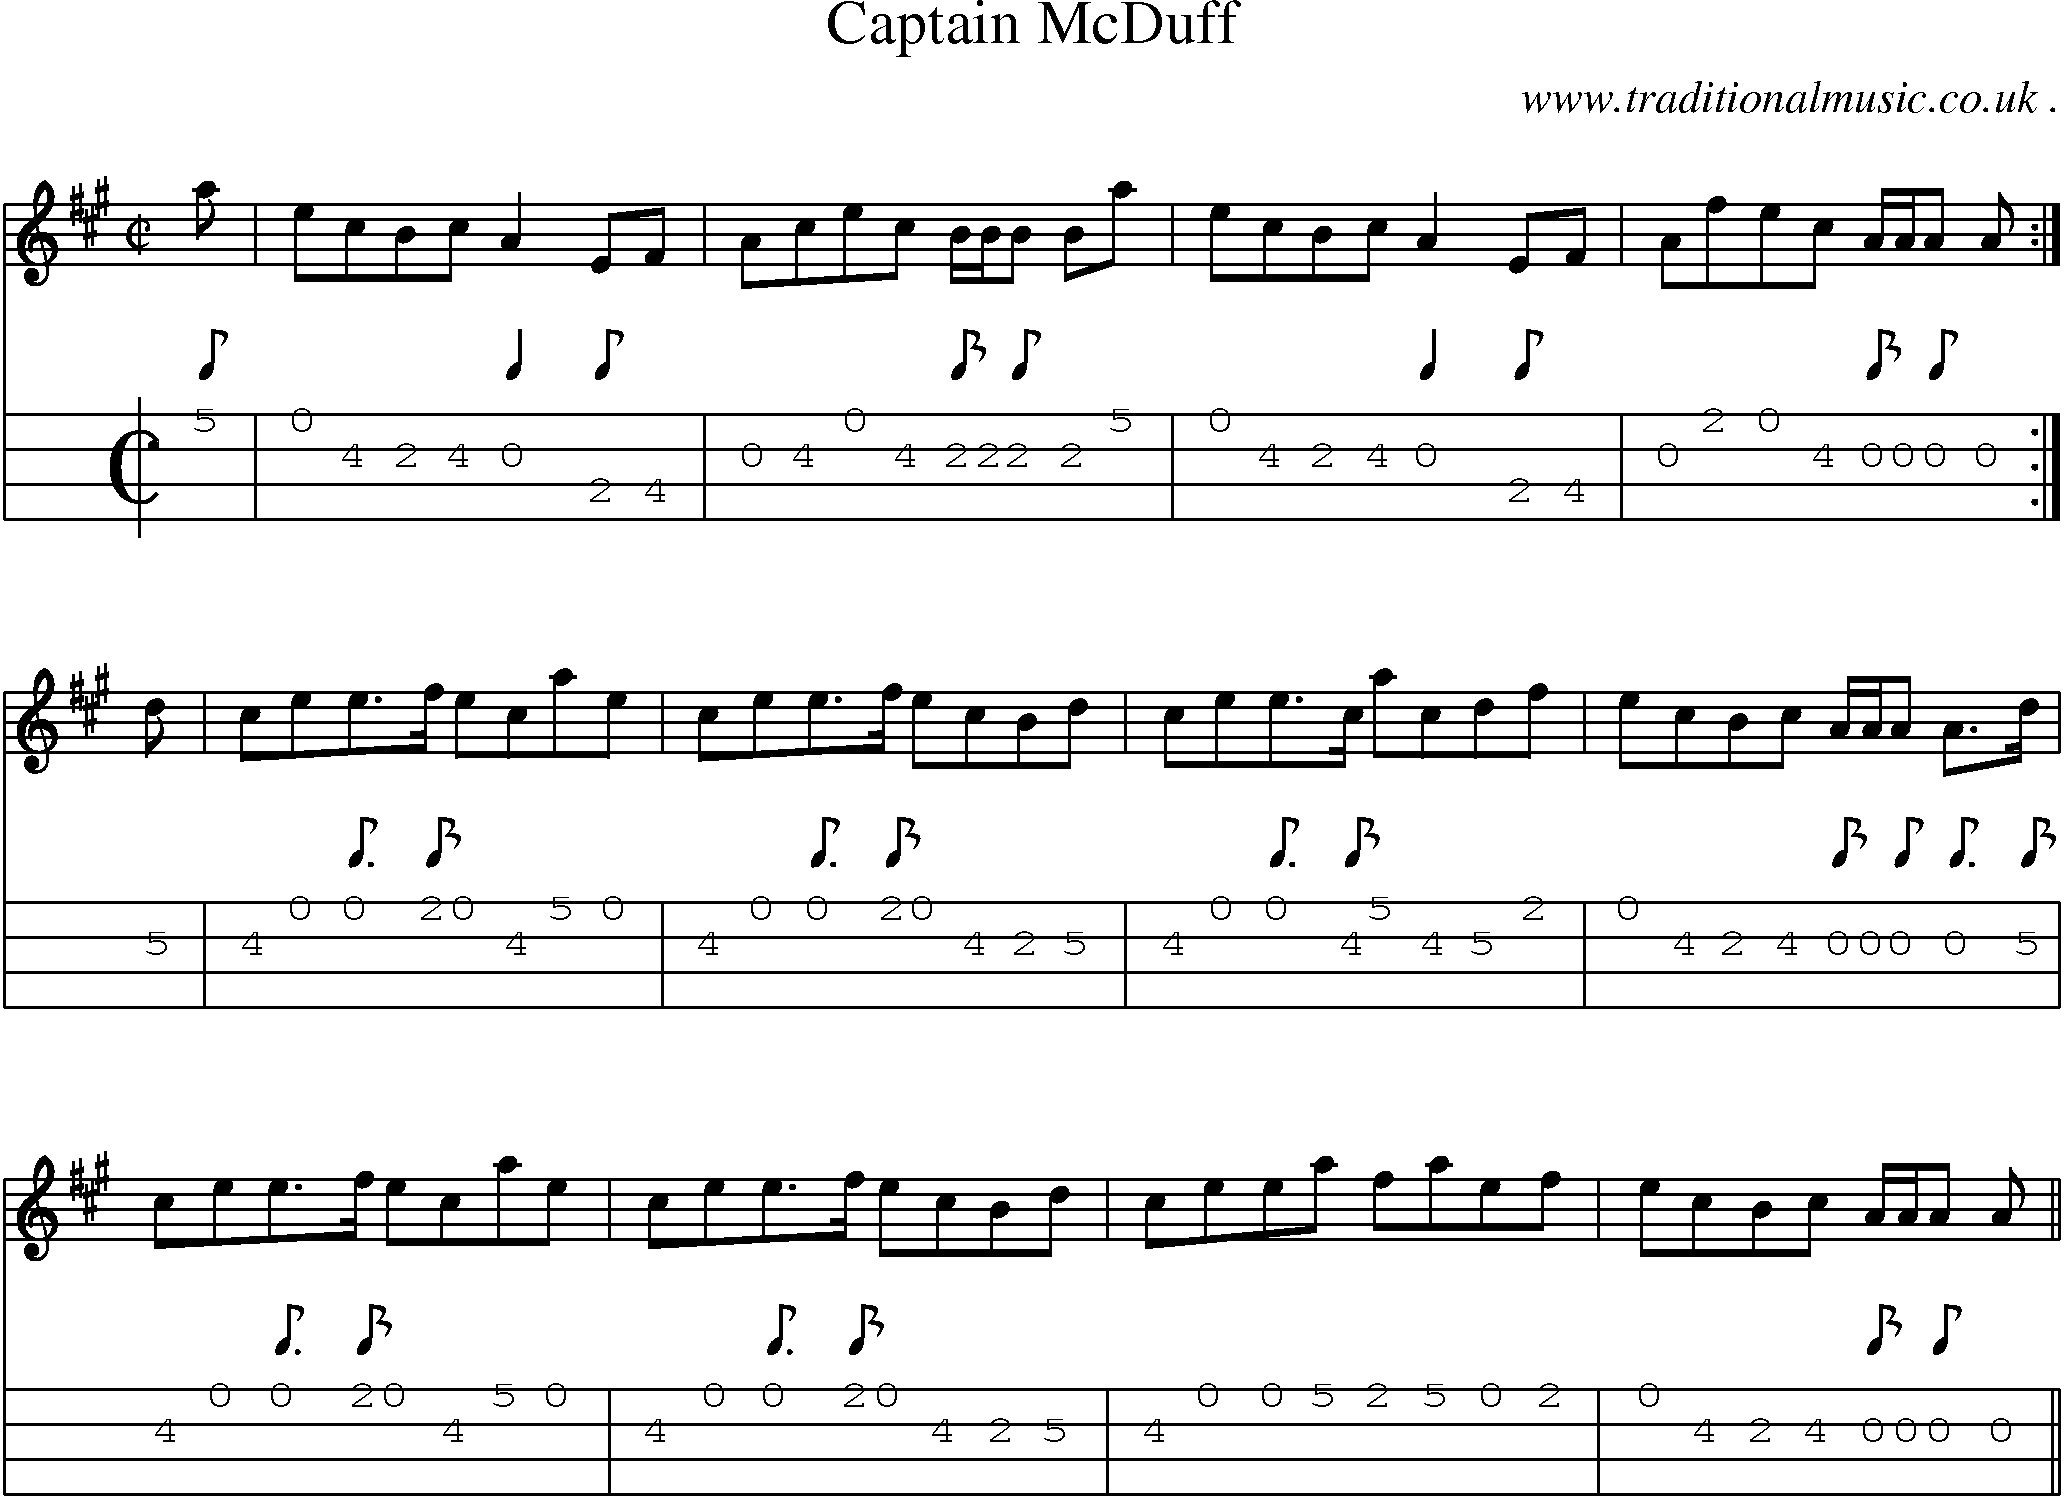 Sheet-music  score, Chords and Mandolin Tabs for Captain Mcduff